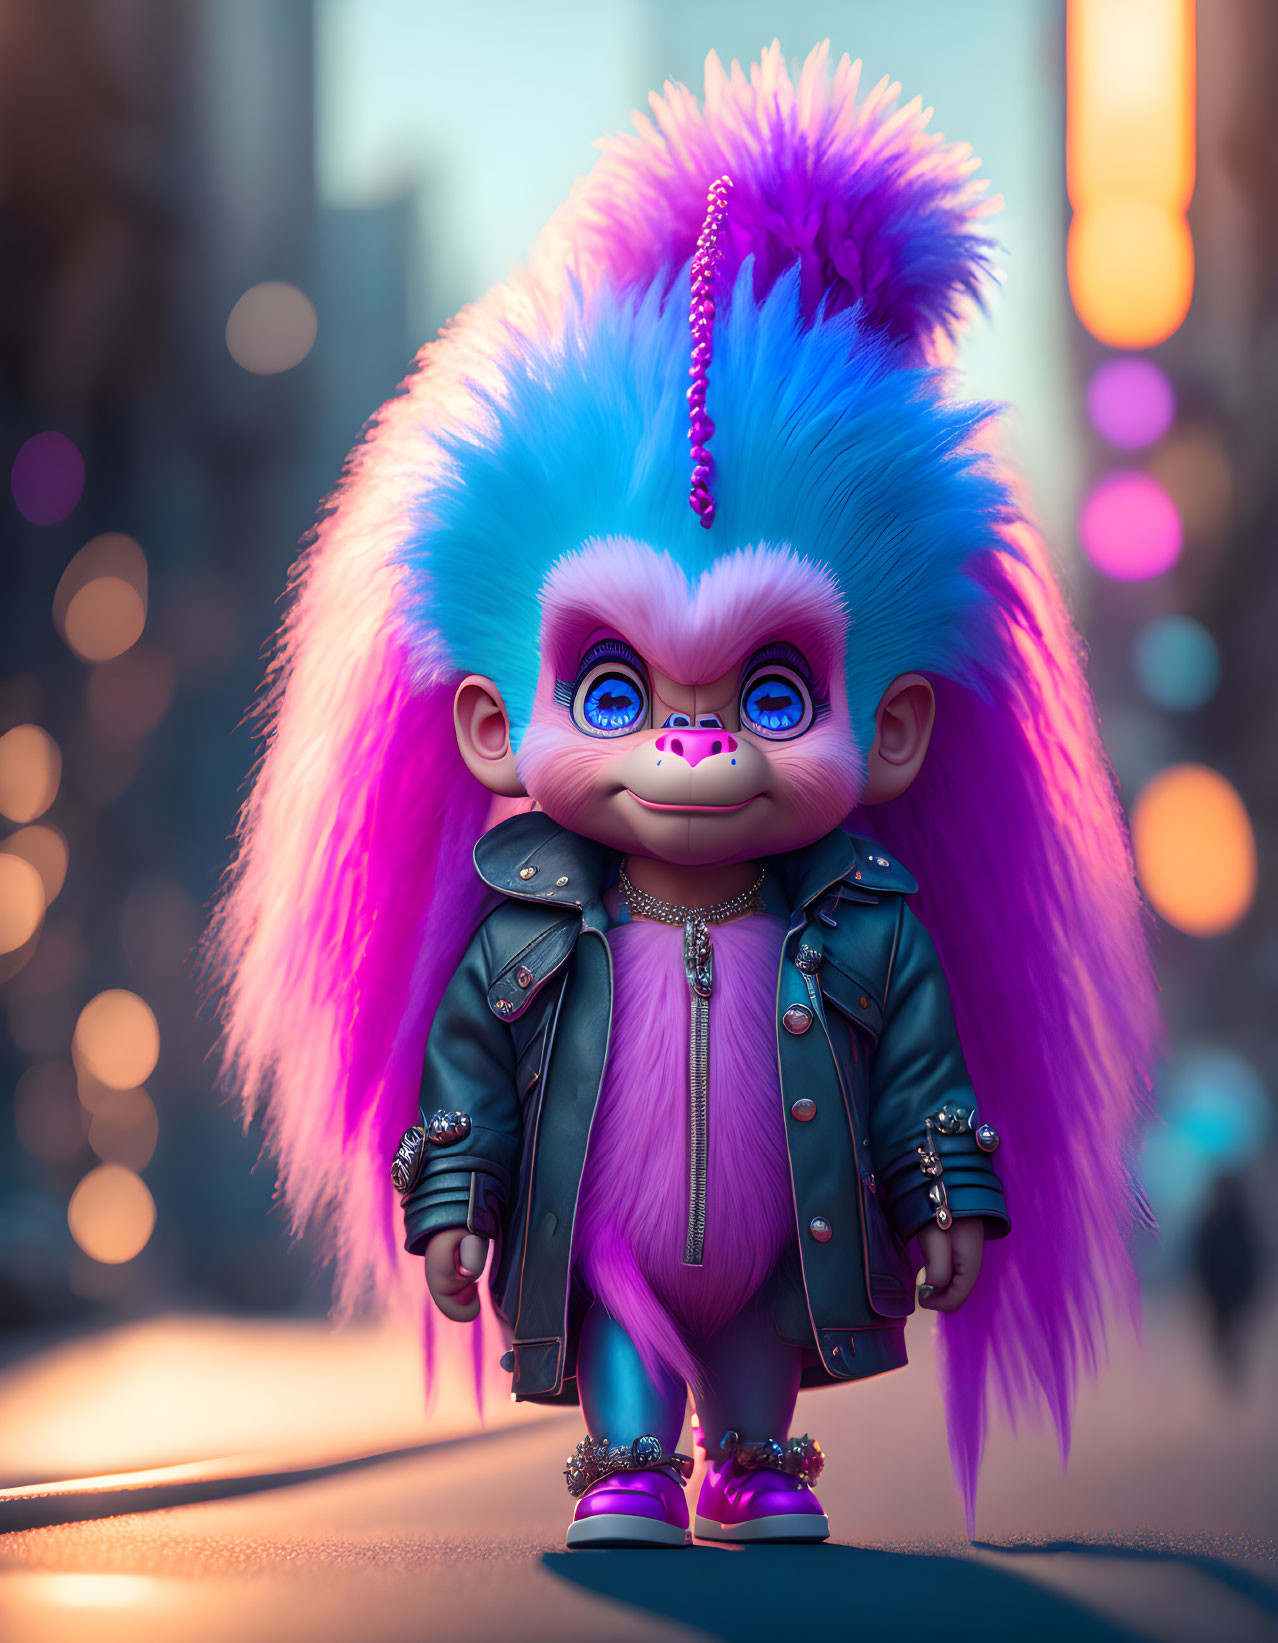 Colorful Troll doll with pink and blue hair in leather jacket on city road